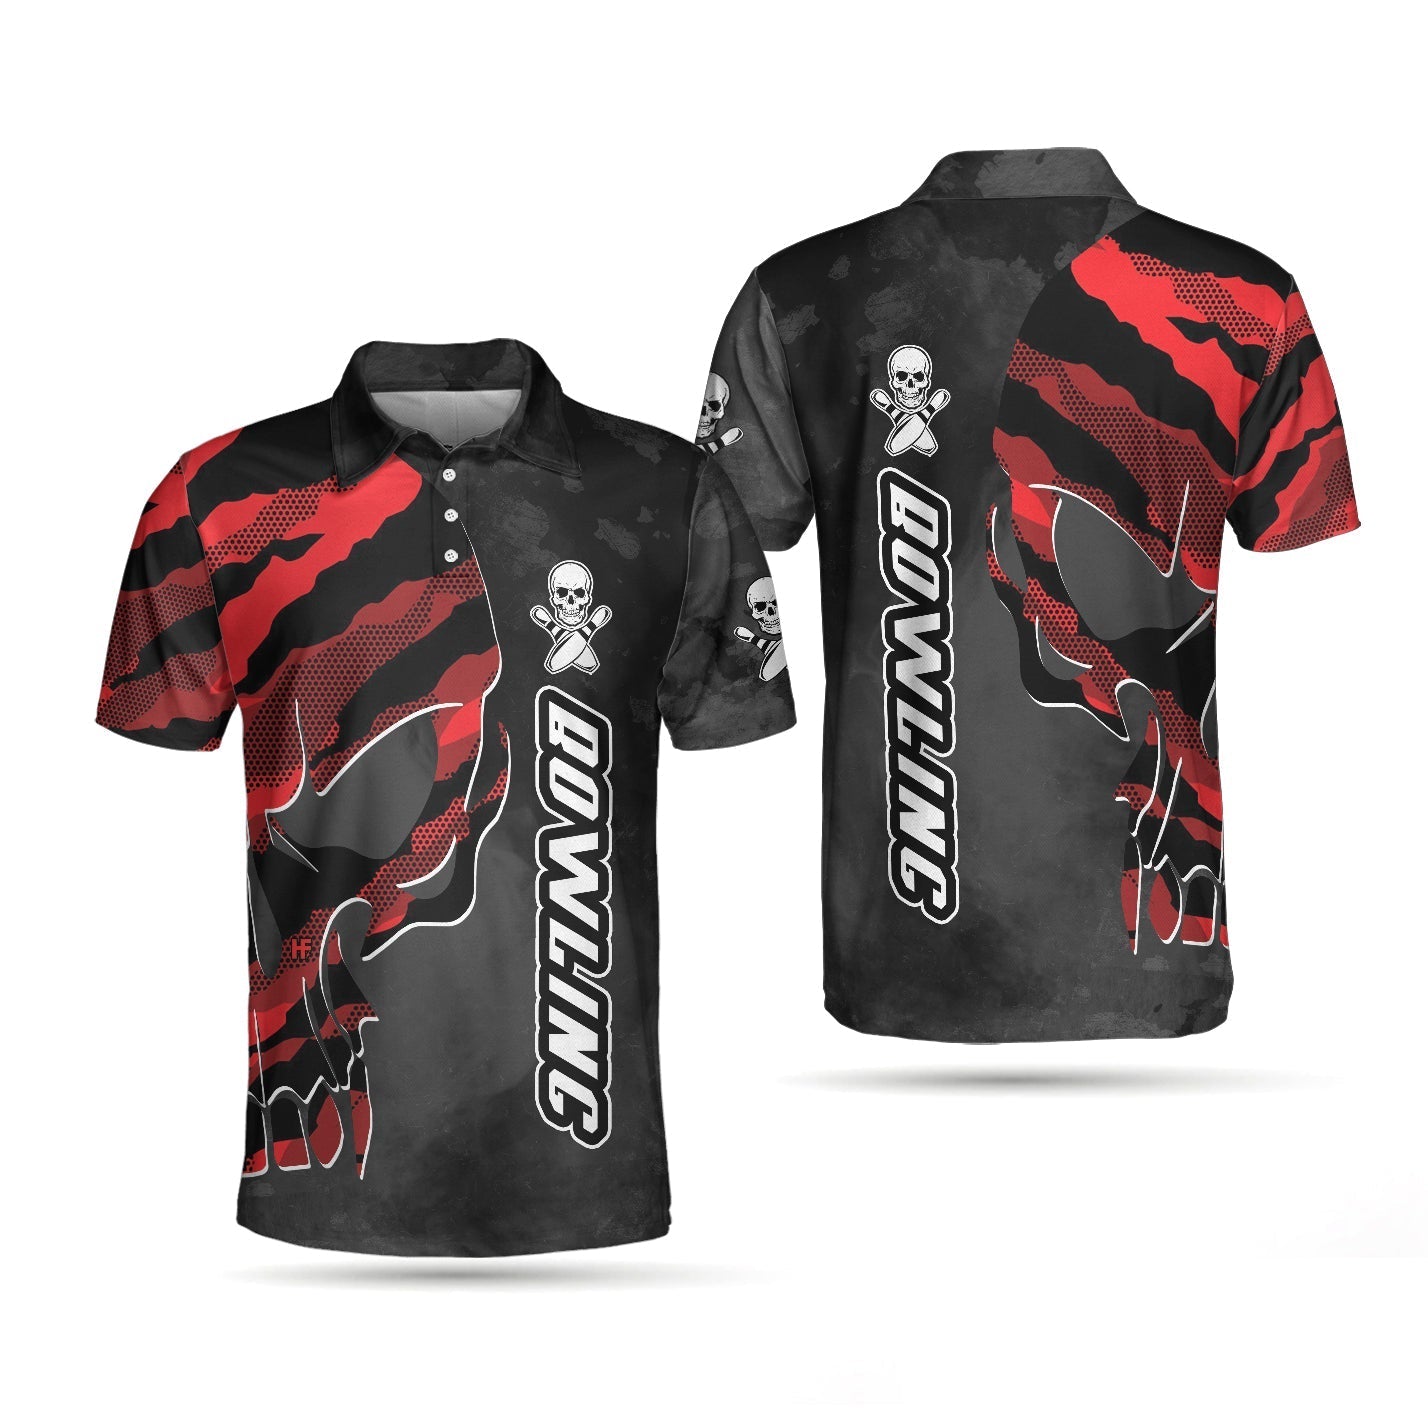 Coolest Skull Bowling With Camouflage Pattern Bowling Polo Shirt/ Camo Bowling Shirt For Men Coolspod